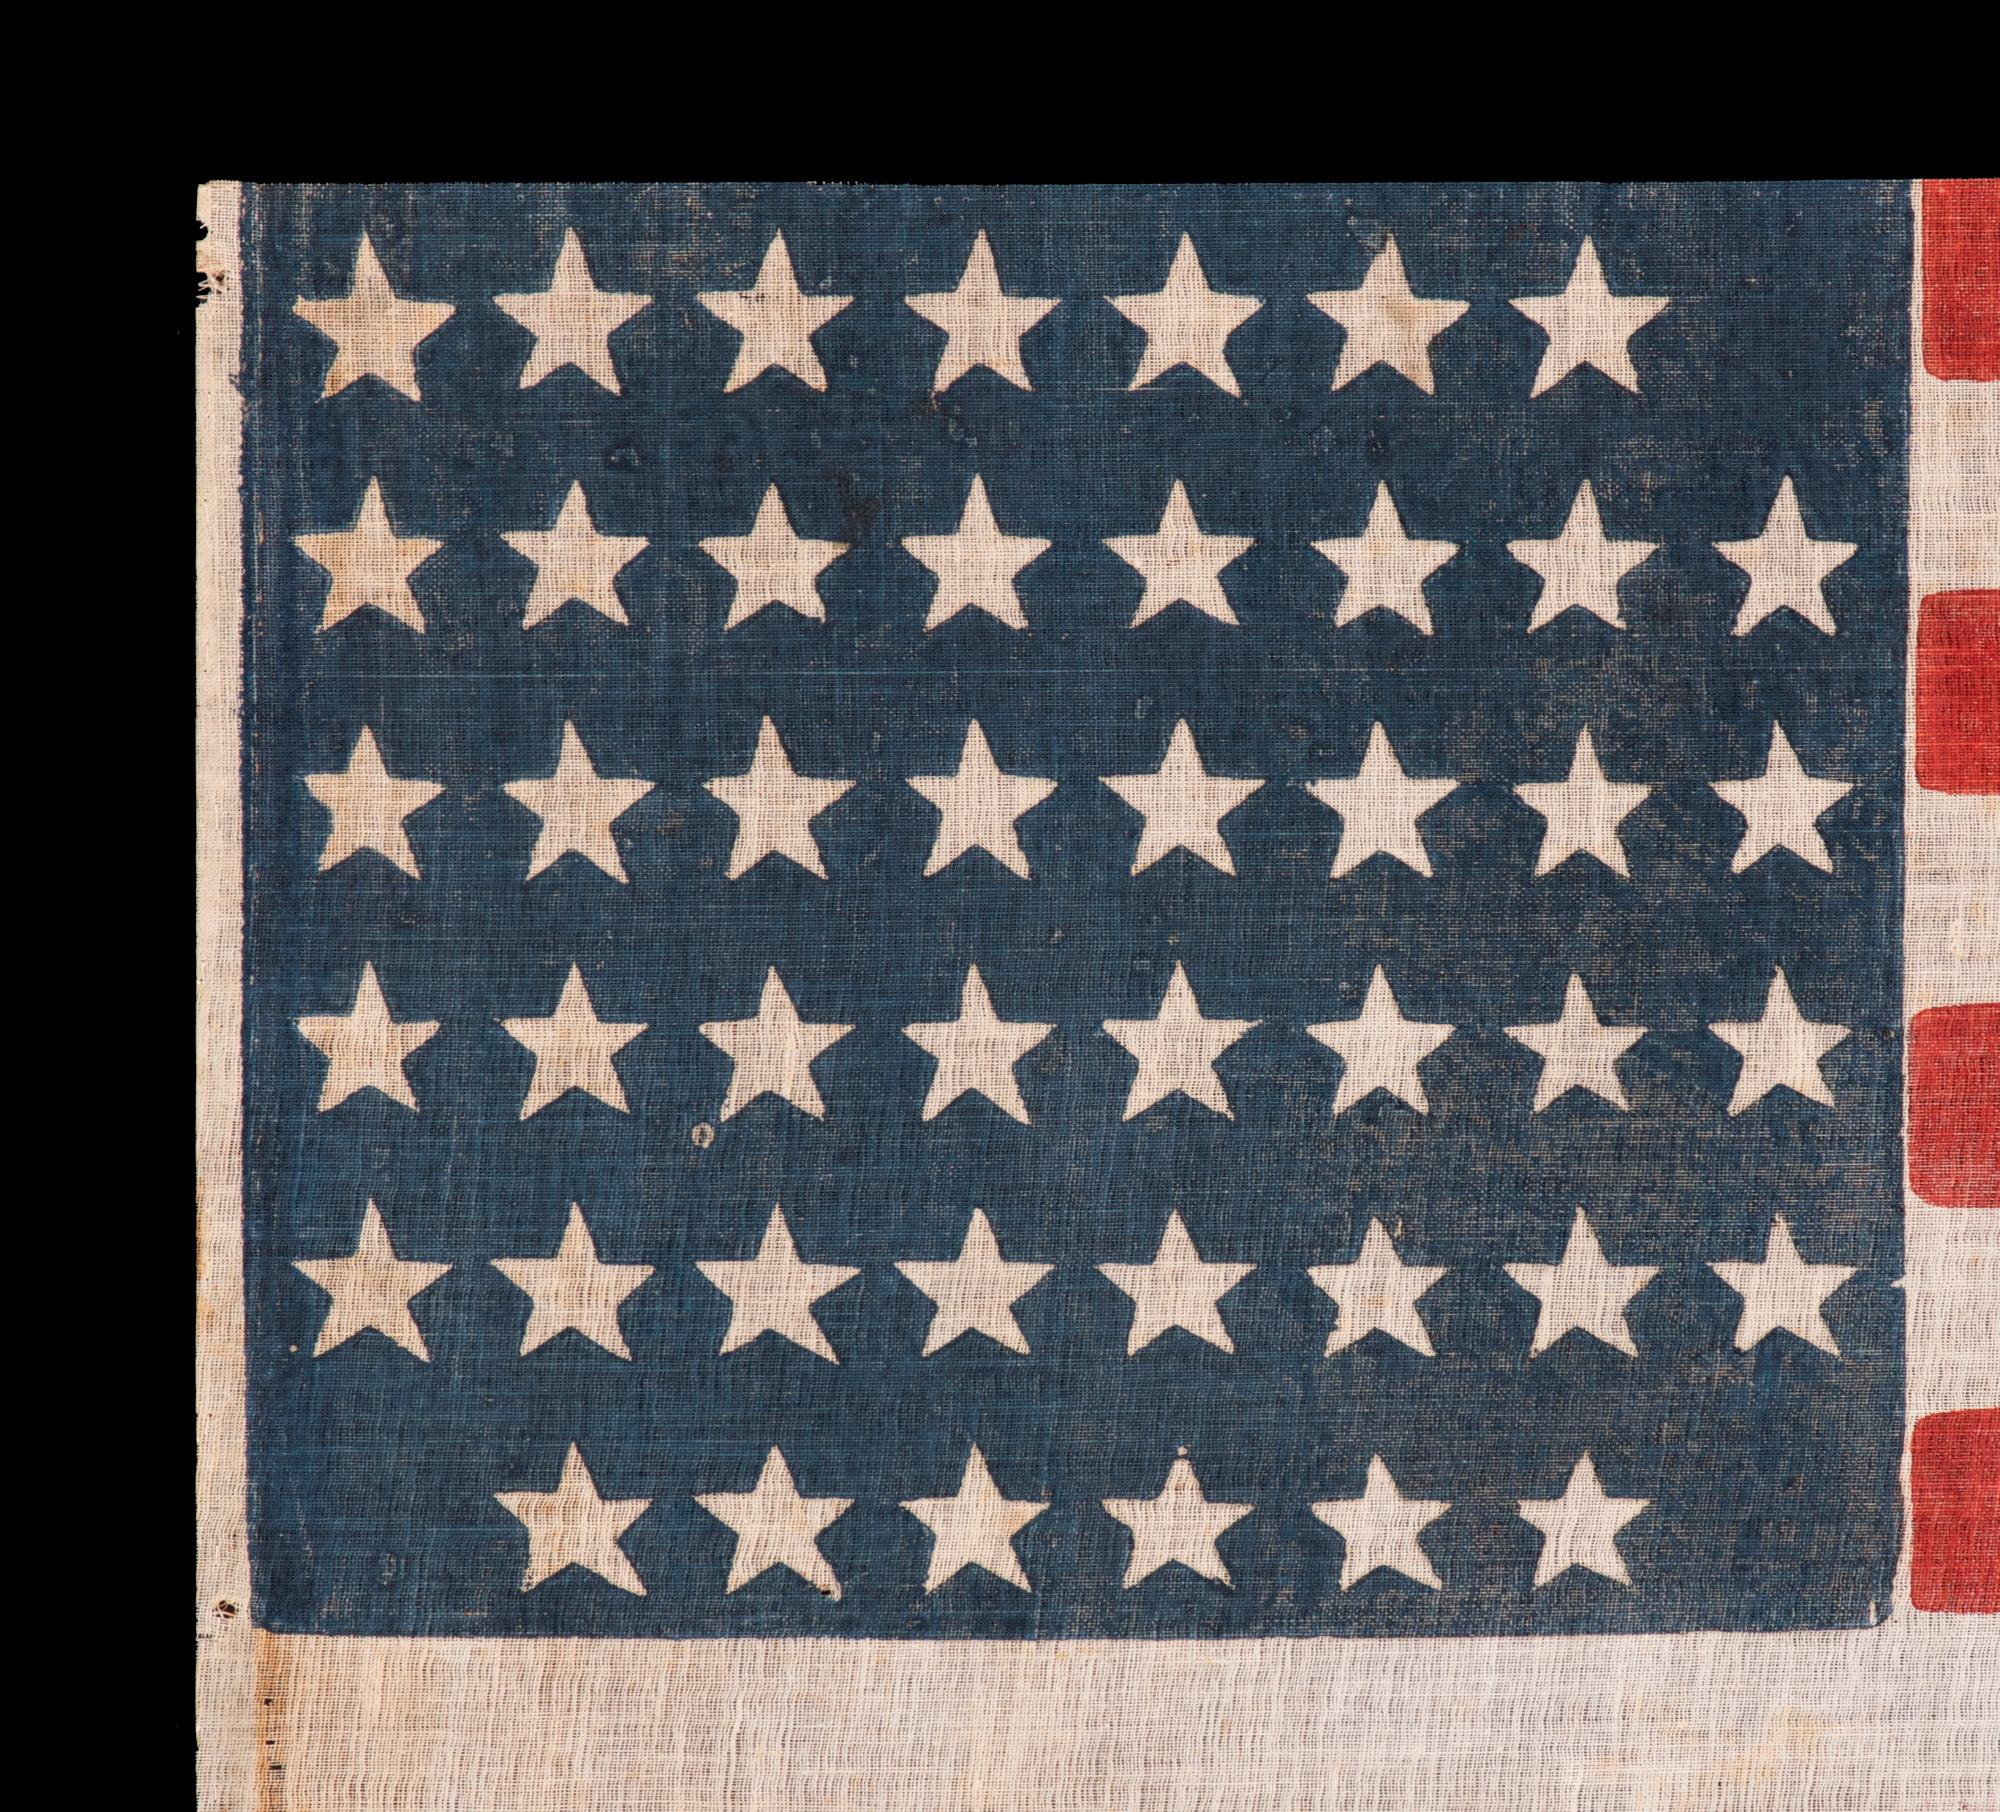 45 Star Antique American Flag, Utah Statehood, Ca 1896-1908 In Good Condition For Sale In York County, PA